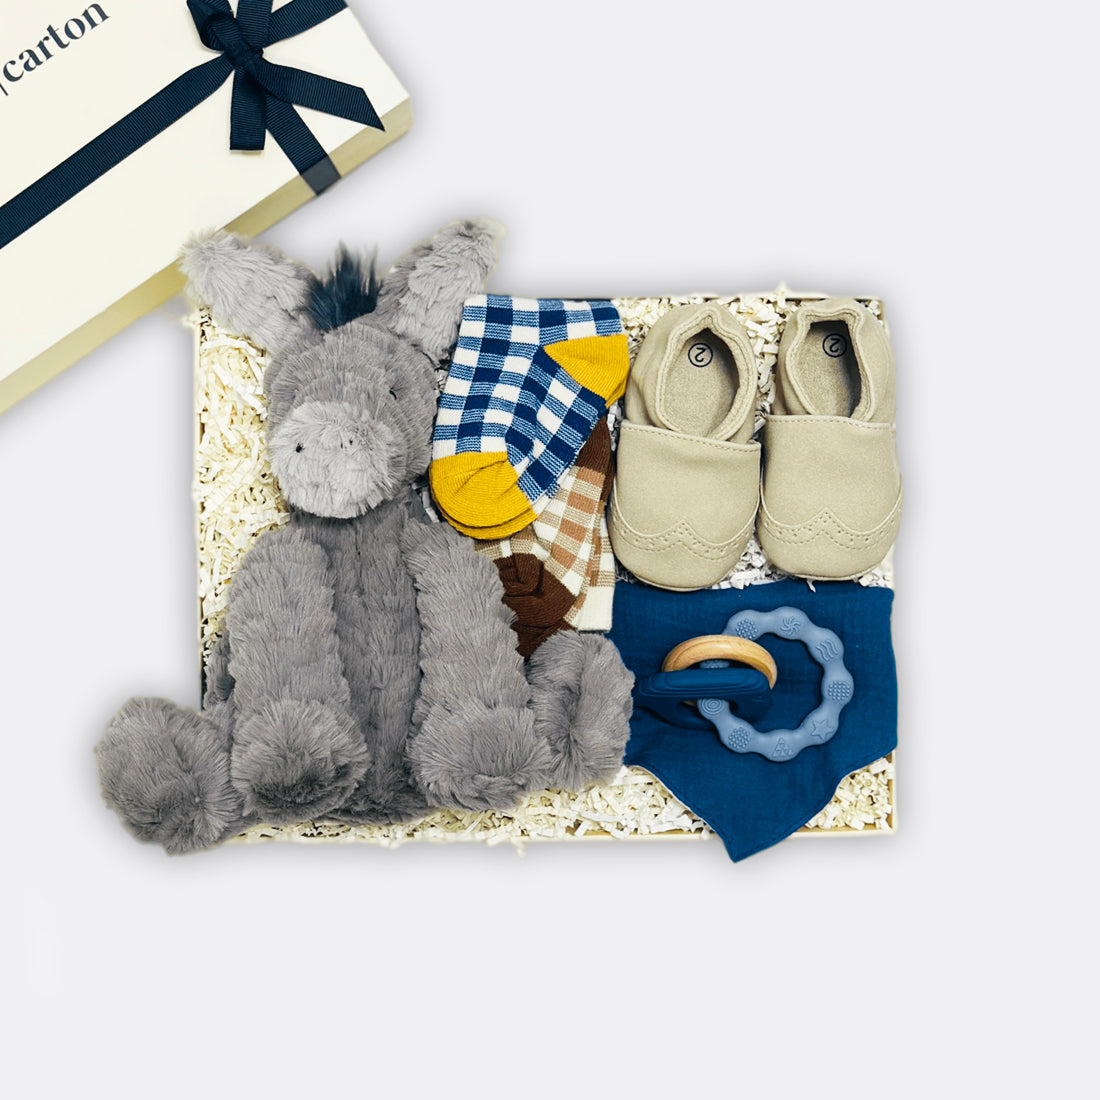 Fufflewuddle Donkey Soft Toy My Moccasin | Off white Double-sided cotton bib Whale Teether Baby Carreaux Socks | Blue Baby Carreaux Socks | Tan, the best-customized gift box and gifts for her and for him from Inna Carton online shop Dubai, UAE